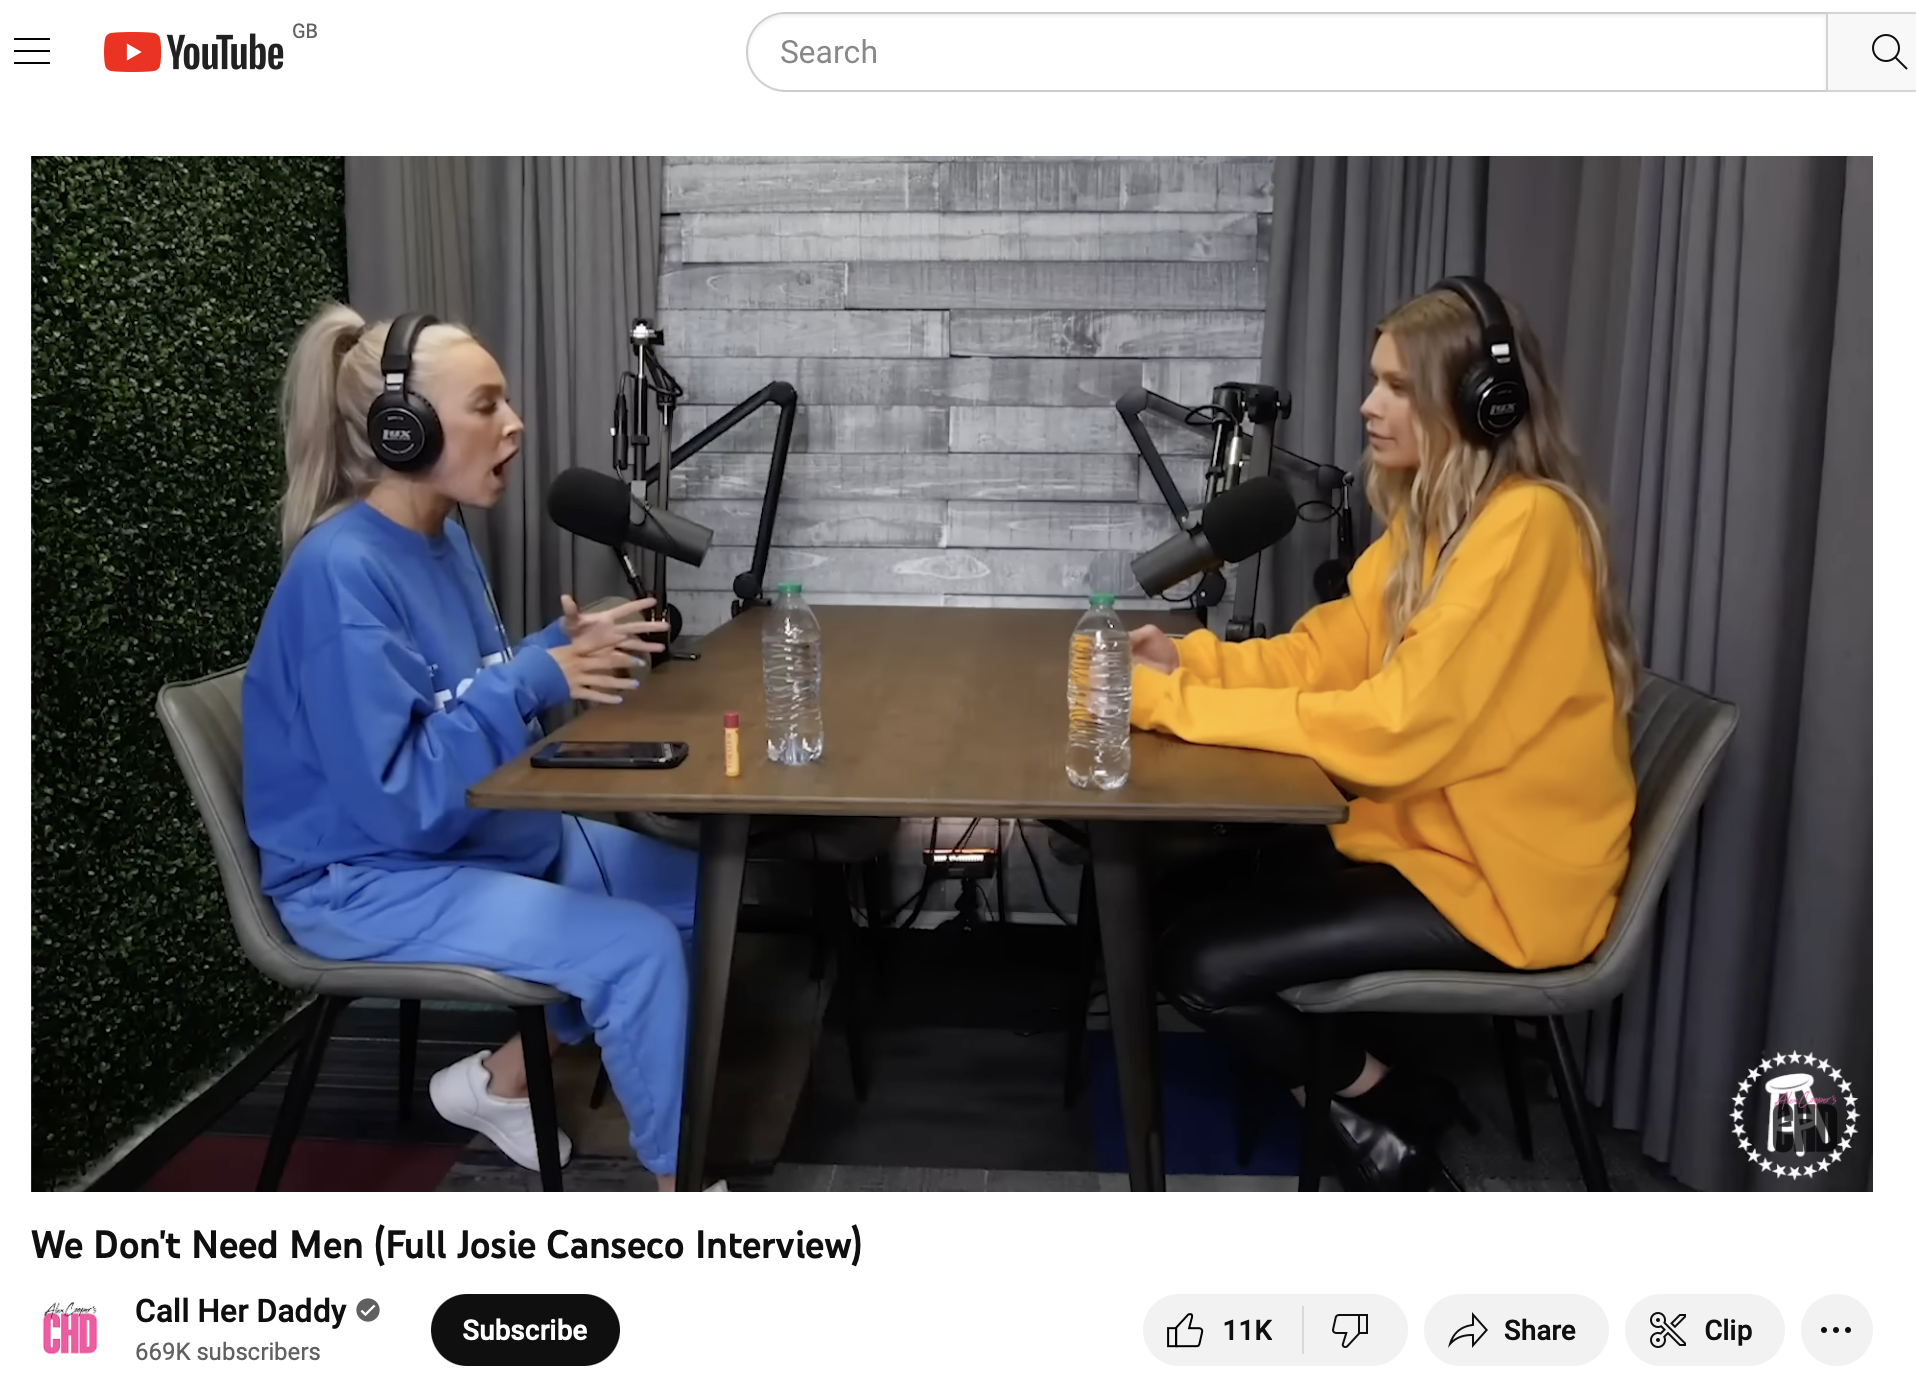 Podcast guests in a YouTube podcast